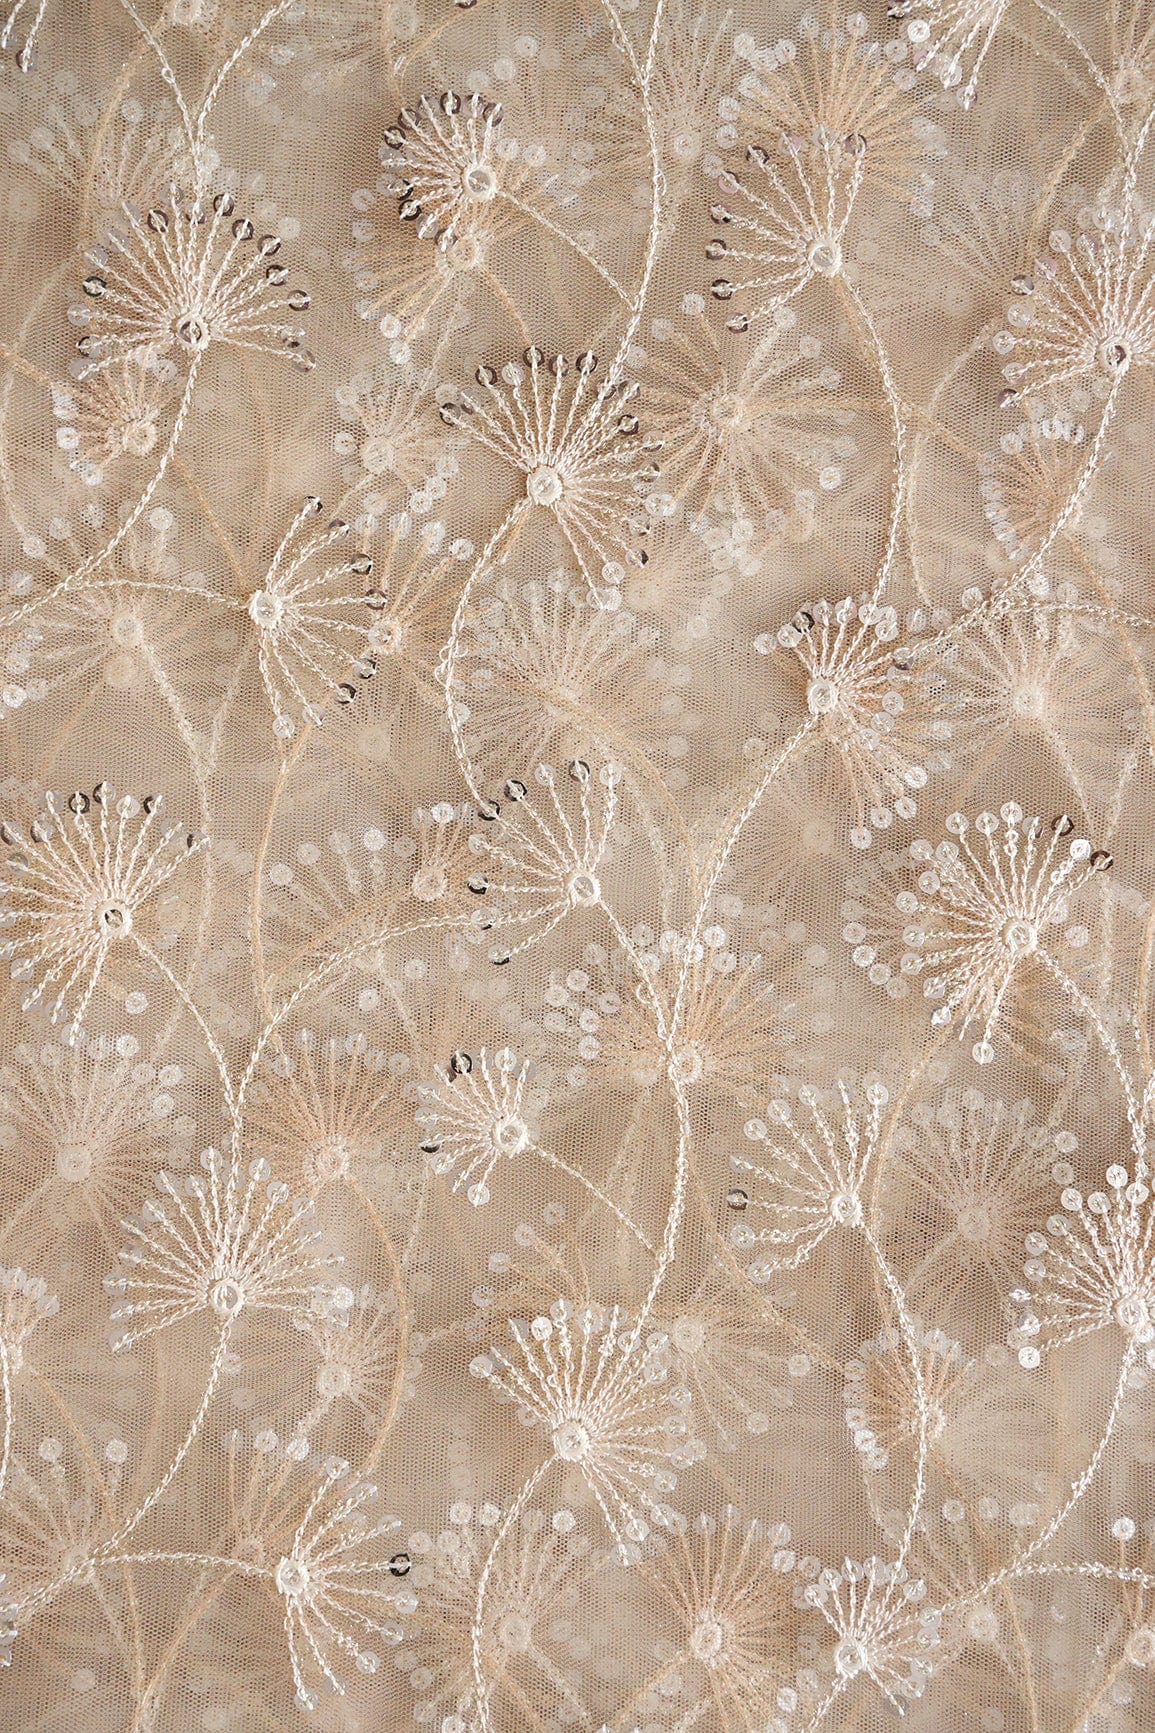 doeraa Embroidery Fabrics Beige Thread With Gold And Silver Sequins Floral Embroidery On Beige Soft Net Fabric